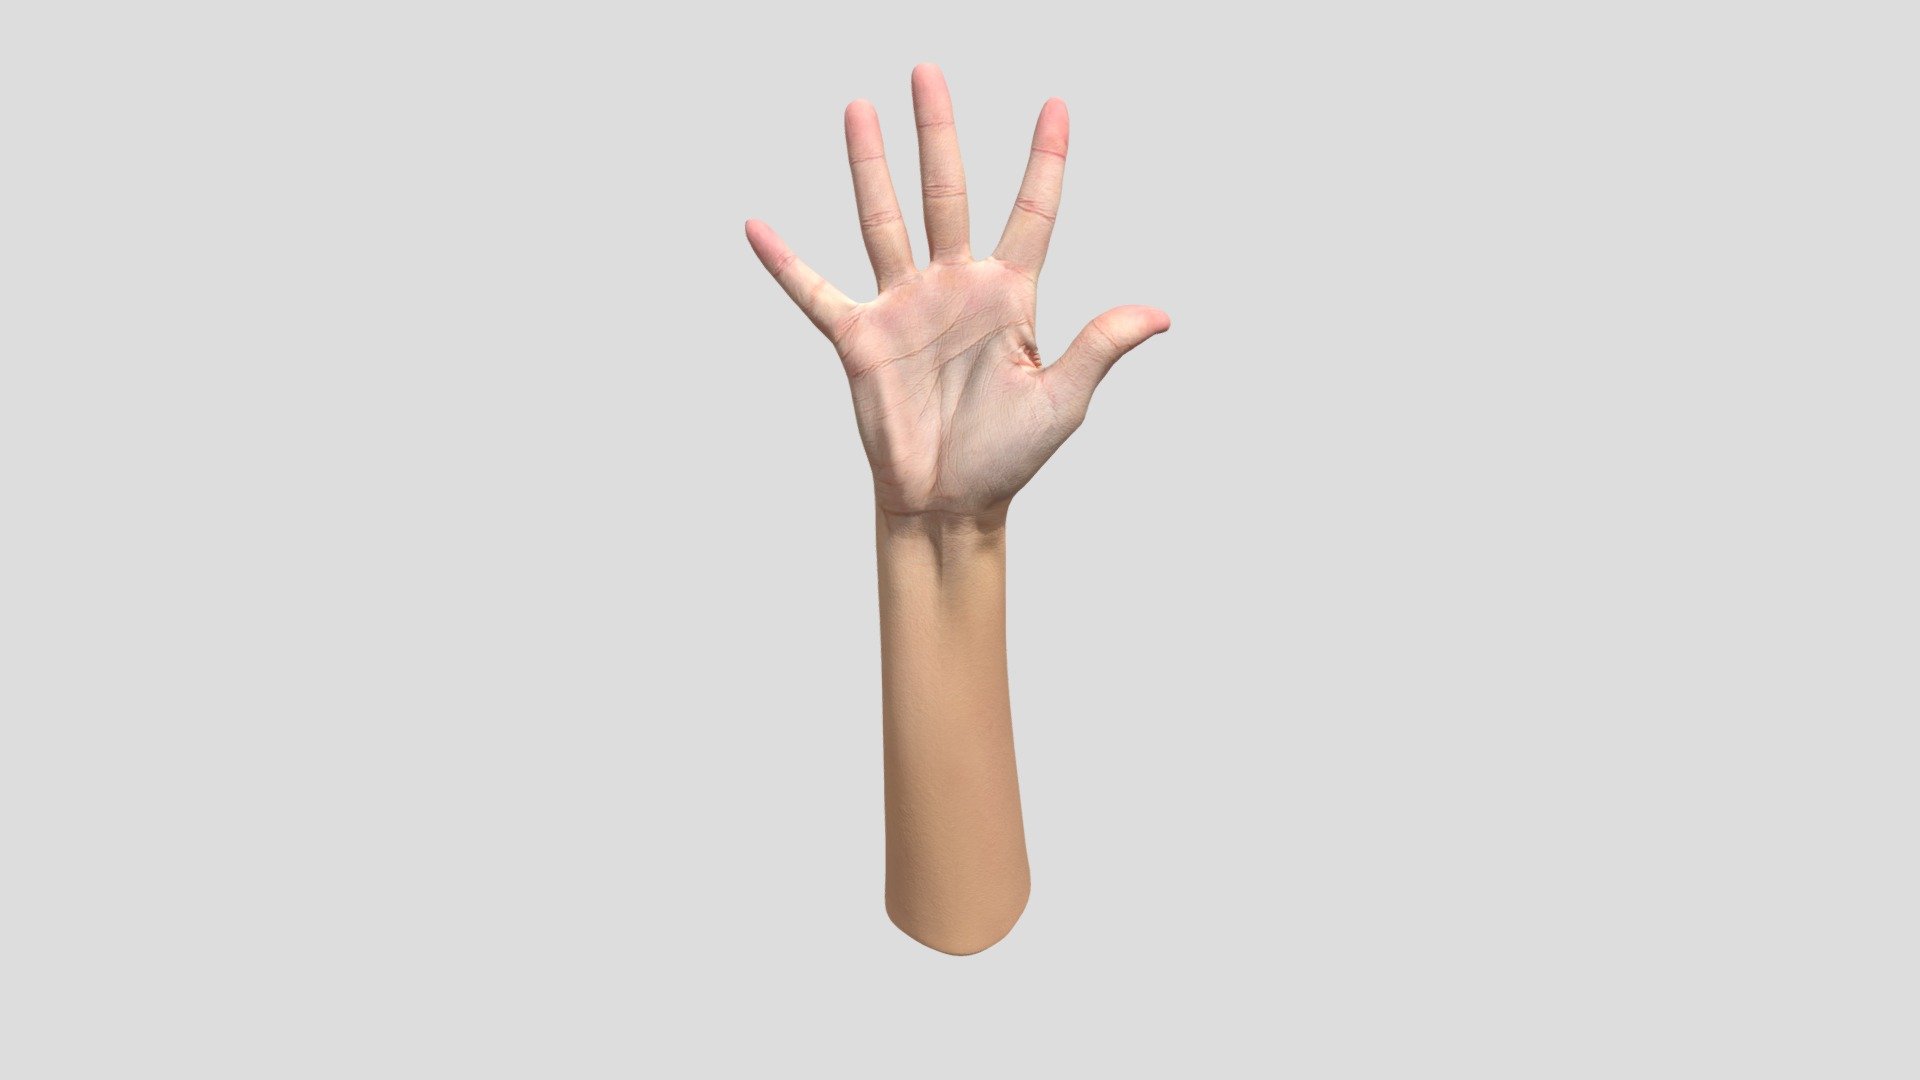 We would like to introduce you to one of the many retopologized hands that offers precise retopology.This hand is perfect for anyone looking for a realistic and aesthetically crafted model for their projects. Find out how this collection can enrich your creative work and give it the visual punch it needs!

Ethnicity: Hispanic
Gender: female
Age: 44
Height: 171 cm
Weight: 60 kg

NOTE: Retopologized scan with postproduction.

Technical Specifications:

1 x OBJ. File / 16 600 polys
2 x 8K PNG Texture - Diffuse, Normal

3Dsk provides all you need from virtual casting studio. Model casting, neutral &amp; morph expression scans, full body scans, accessories and cloth scans, 3D postproduction, photoshooting of full body, portrait, hair, eyes and skin &amp; other on demand services 3d model